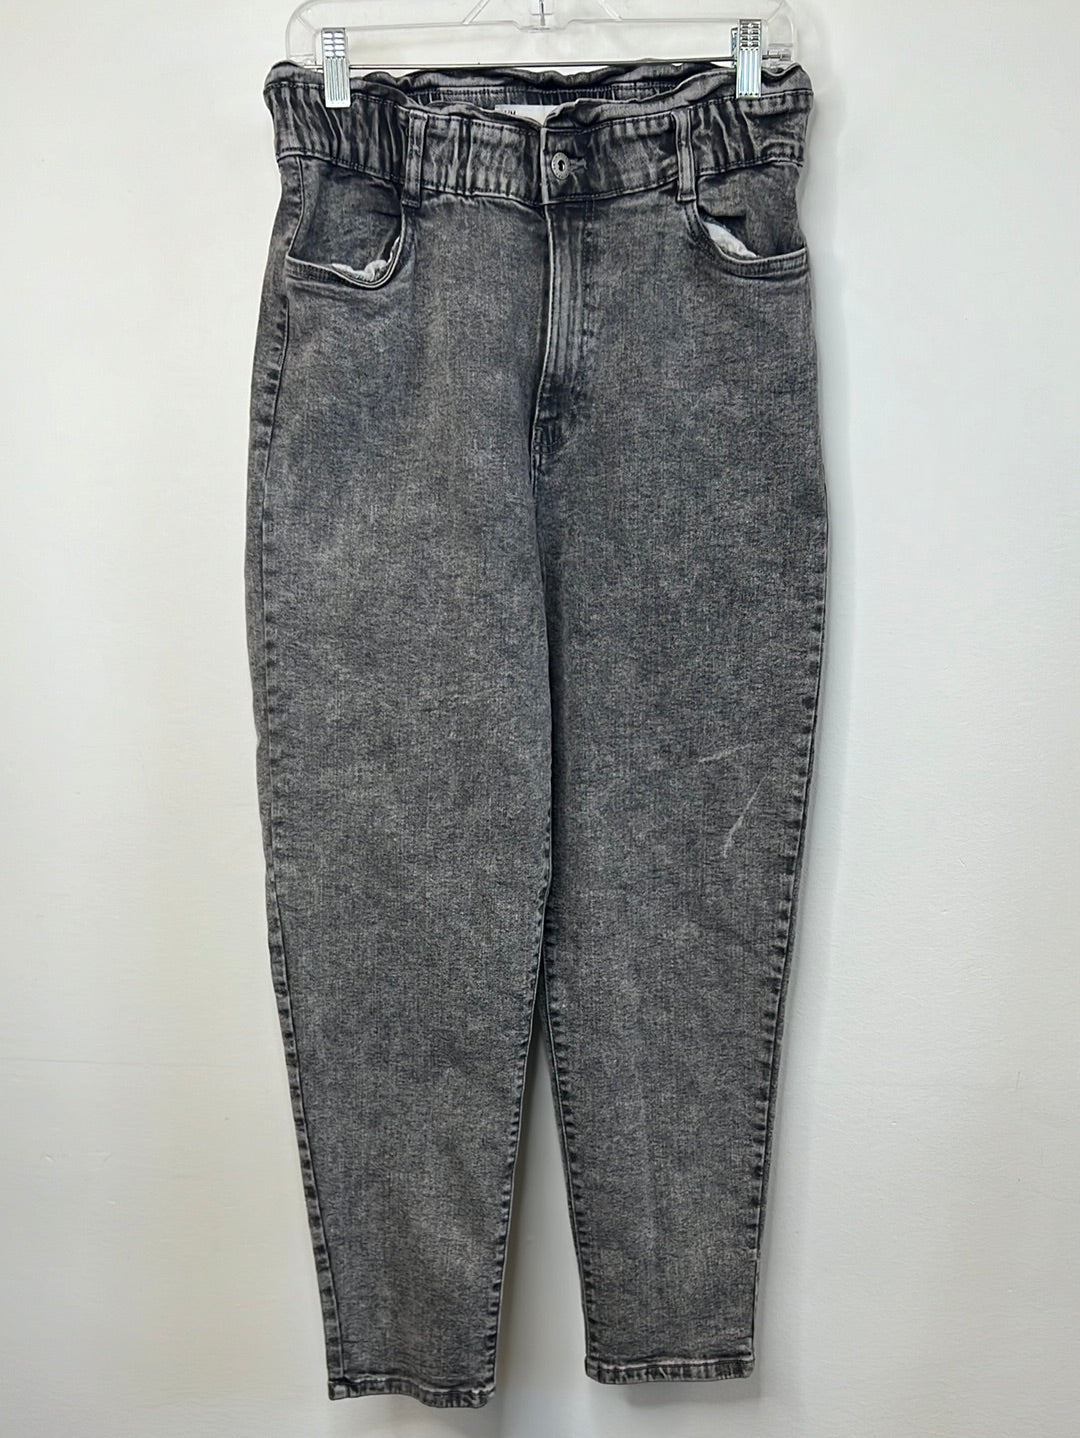 Eighty-Two Balloon Mom Gray Acid Wash Jeans (M)